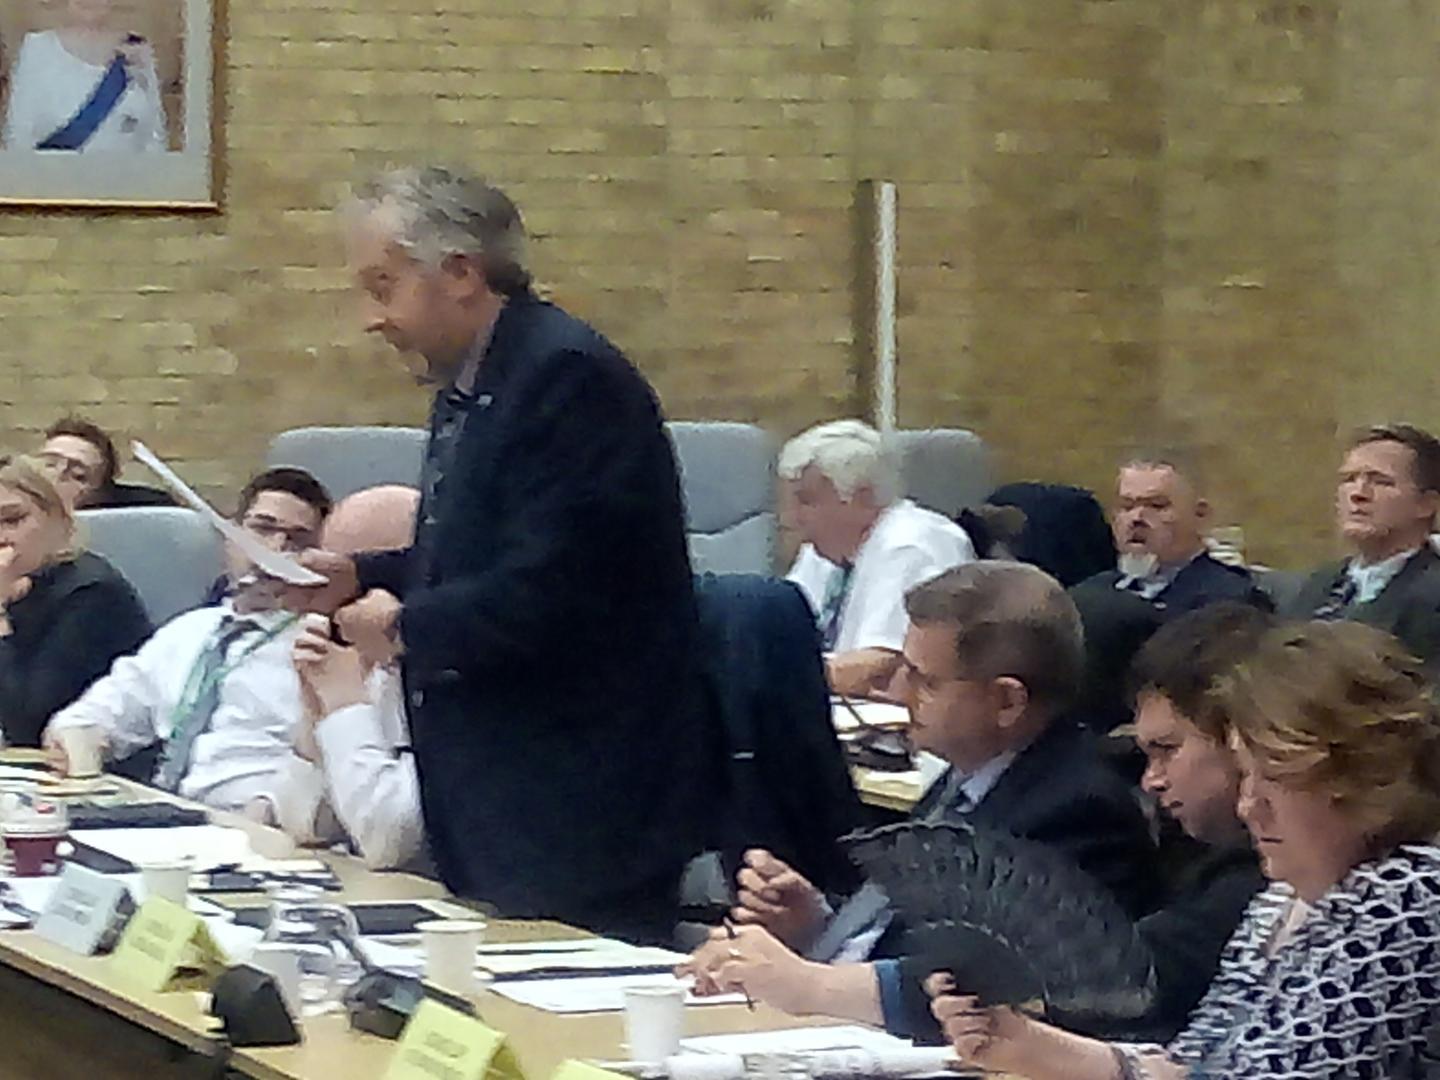 Cllr David Hopkins (Cons, Danesborough & Walton) thanked the administration for a 50,000 investment into the Bow Brickhill Community Centre, in his ward. He was one of a few Conservatives who had items accepted into the budget. Like other Conservatives though, he voted against the overall budget.